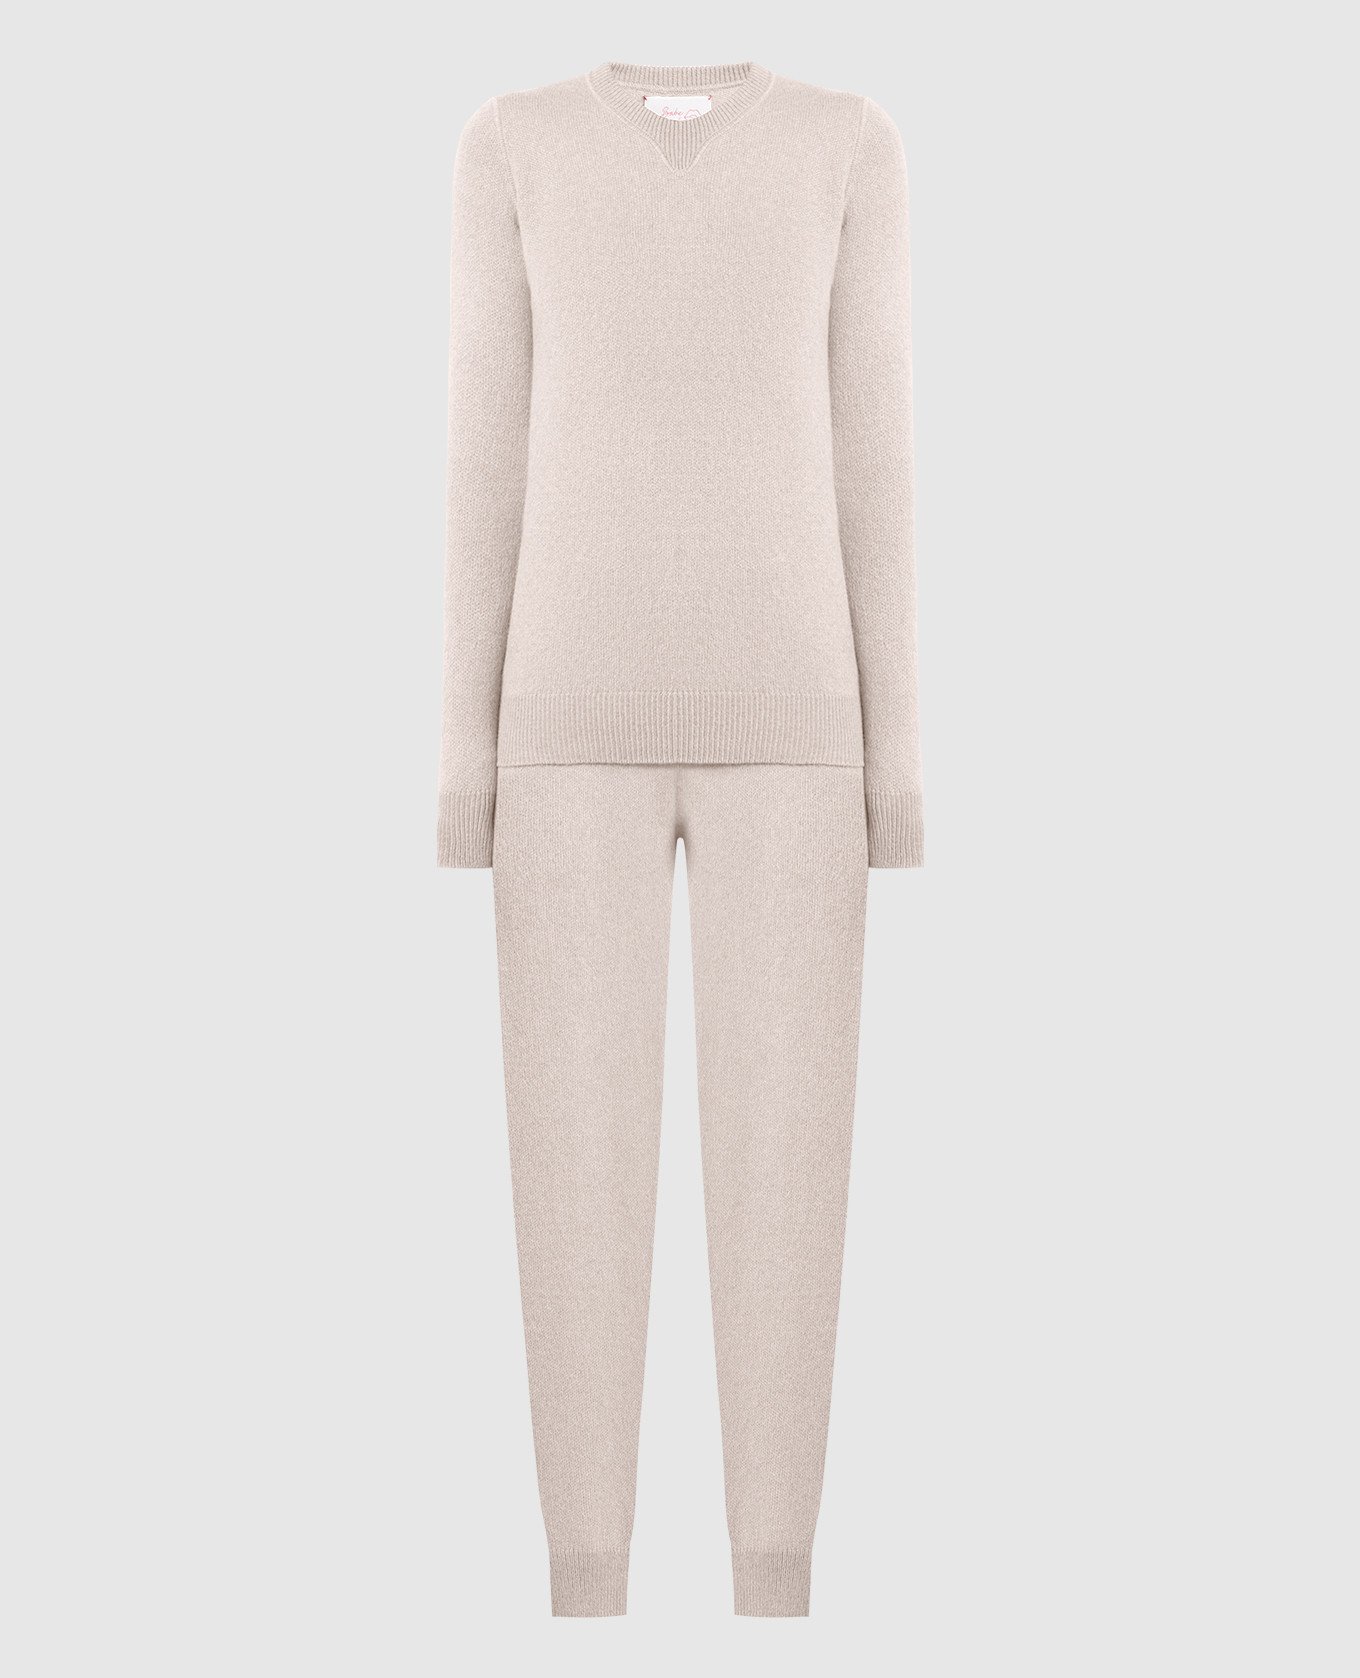 Beige cashmere jumper and joggers suit